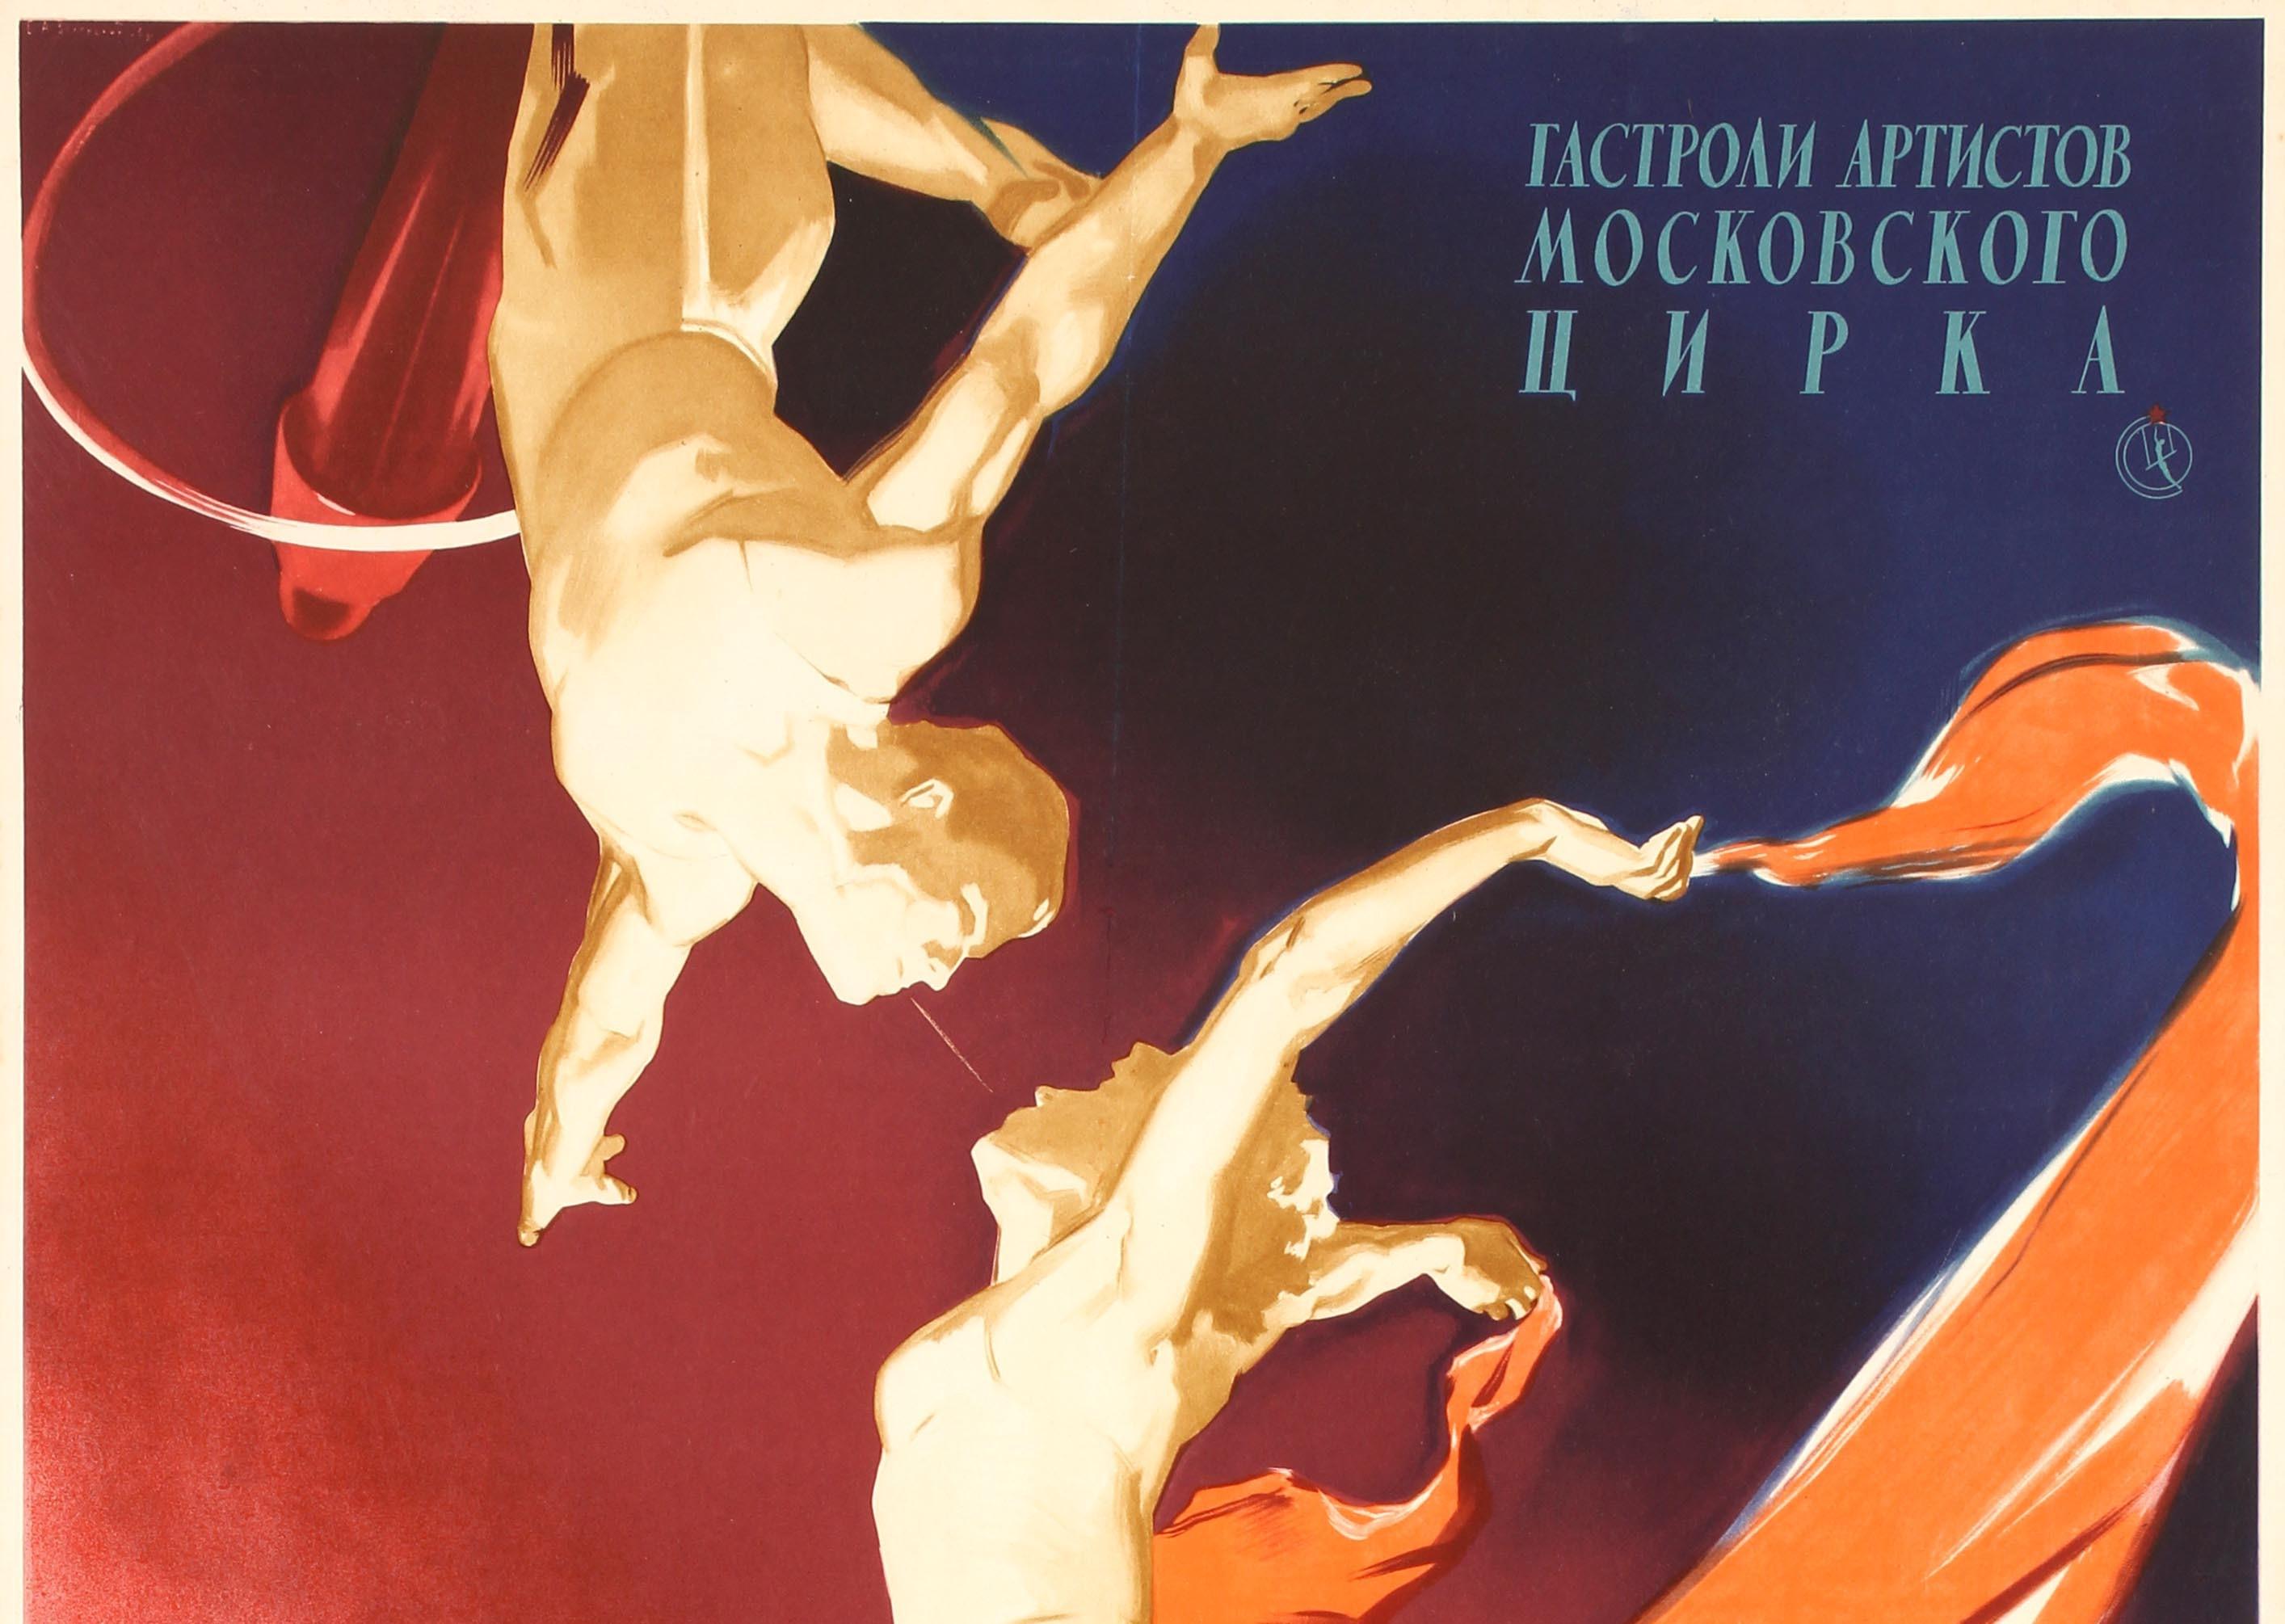 Original vintage circus poster for the Russian Aerial Trapeze Acrobats performances by the Moscow Circus Cirque de Moscou featuring a dynamic illustration of two acrobats against a pink and blue shaded background, one flying through the air holding